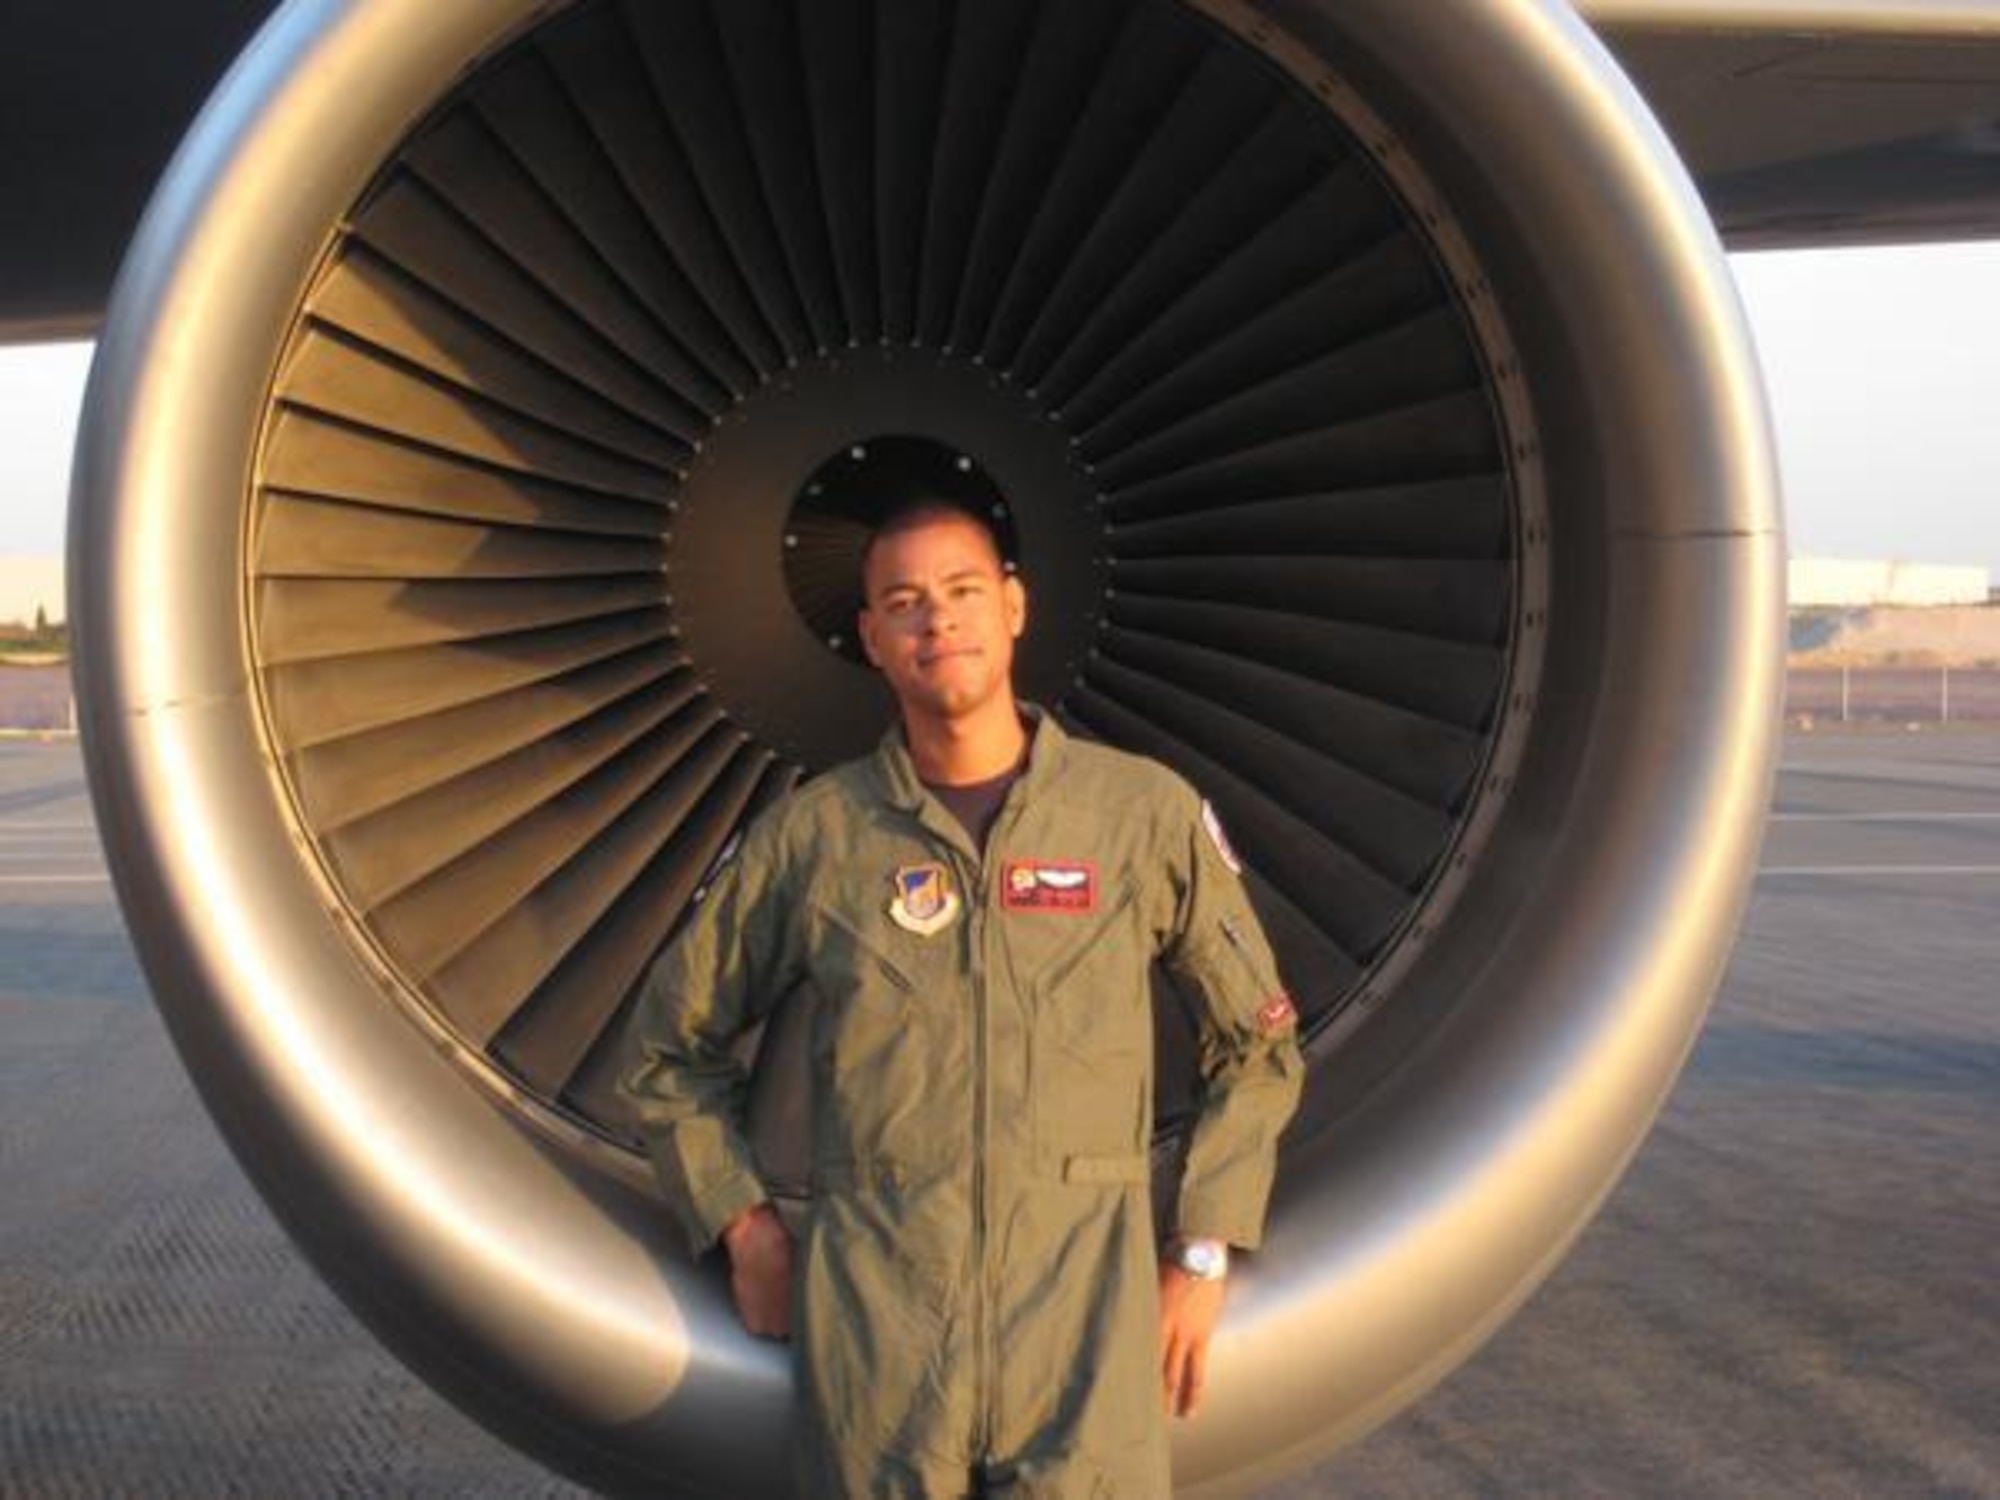 Technical Sergeant Herman "Tre" Mackey III, 30, from Bakersfield, California, sits in front of a KC-135 engine. Sgt. Mackey died on 3 May 2013 when his aircraft crashed shortly after takeoff near Bishkek, Kyrgyzstan. (Courtesy photo)